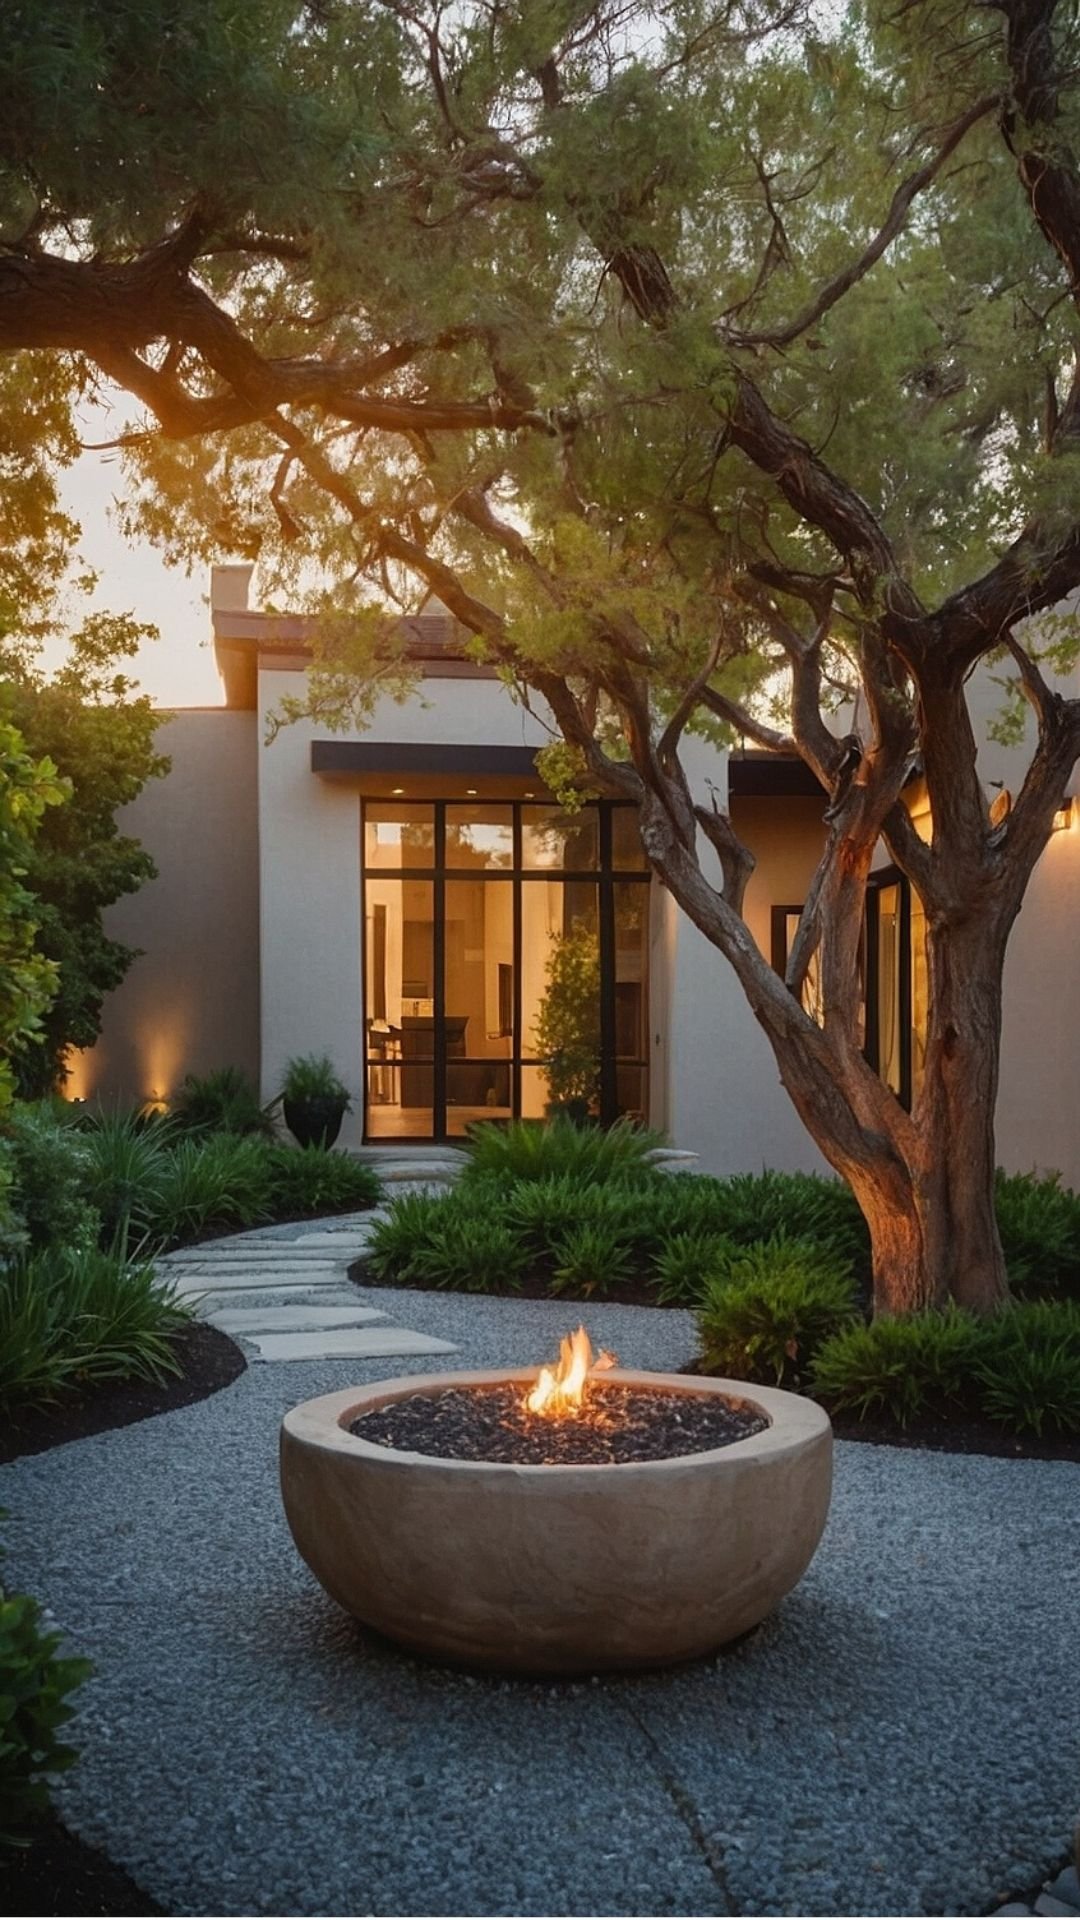 Fireside Elegance – Sophisticated Outdoor Living with a Warm Glow